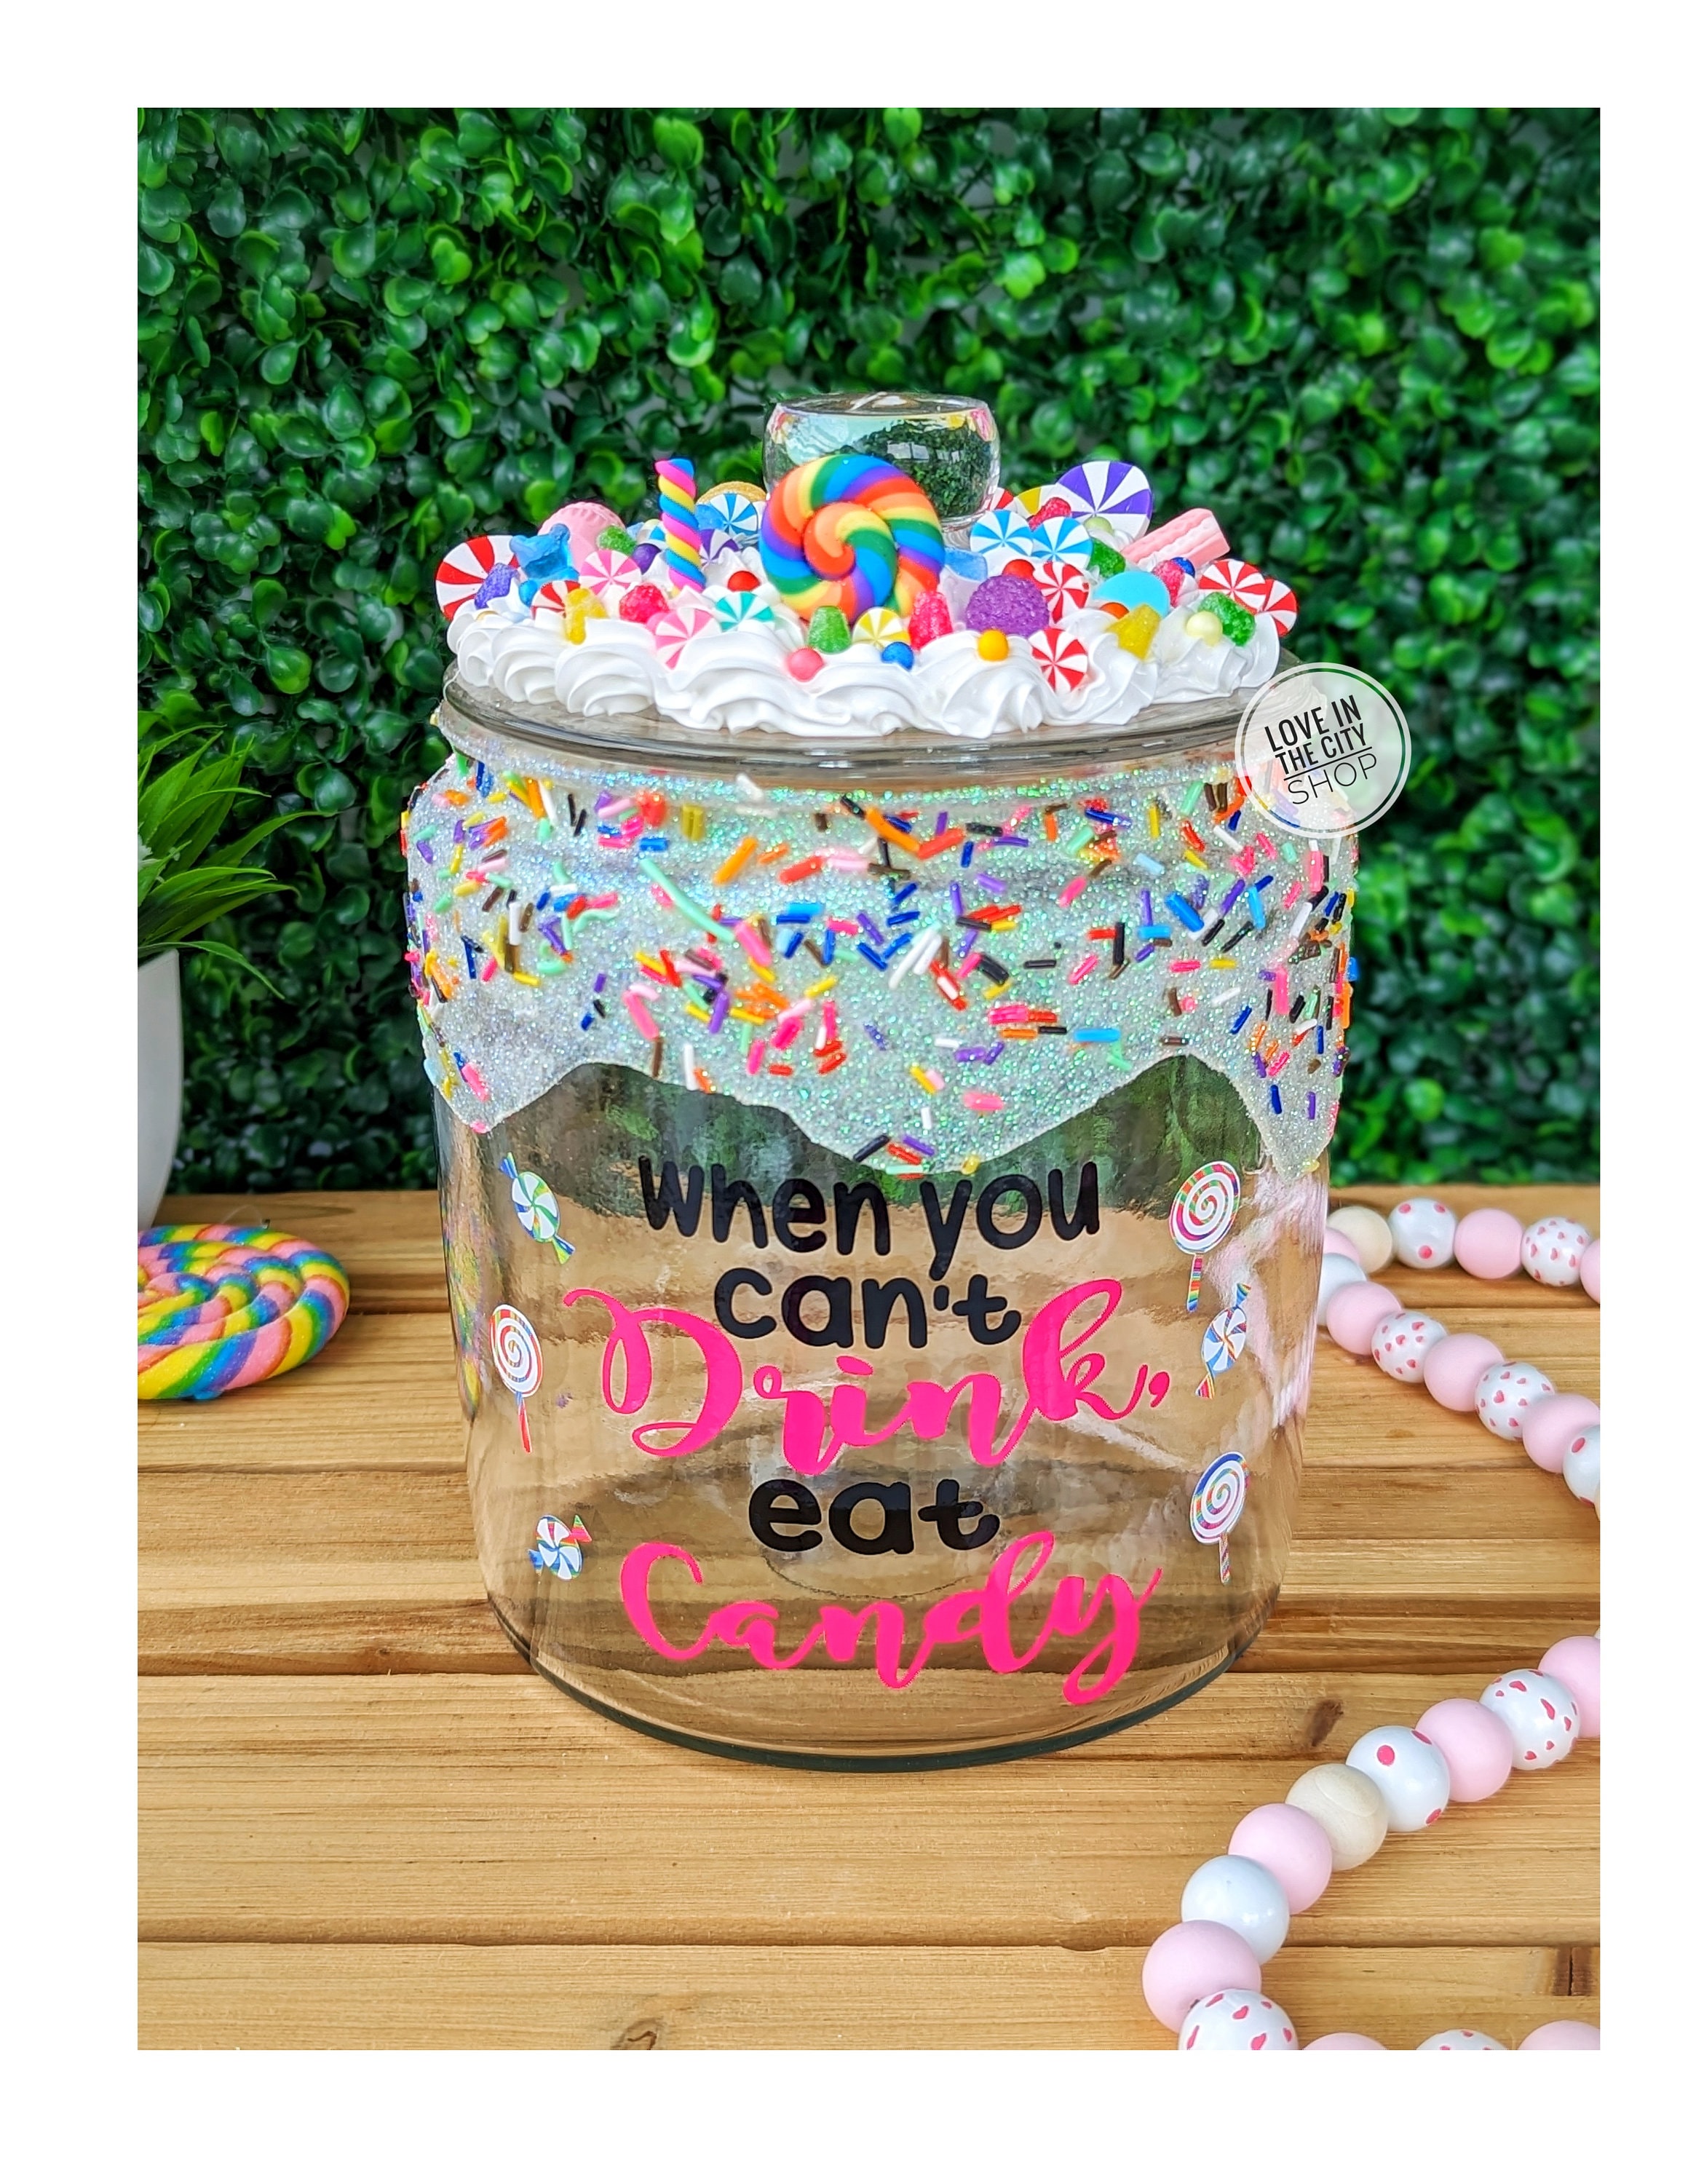 Personalized Candy Jar with Fake Frosting Topper – Love In The City Shop